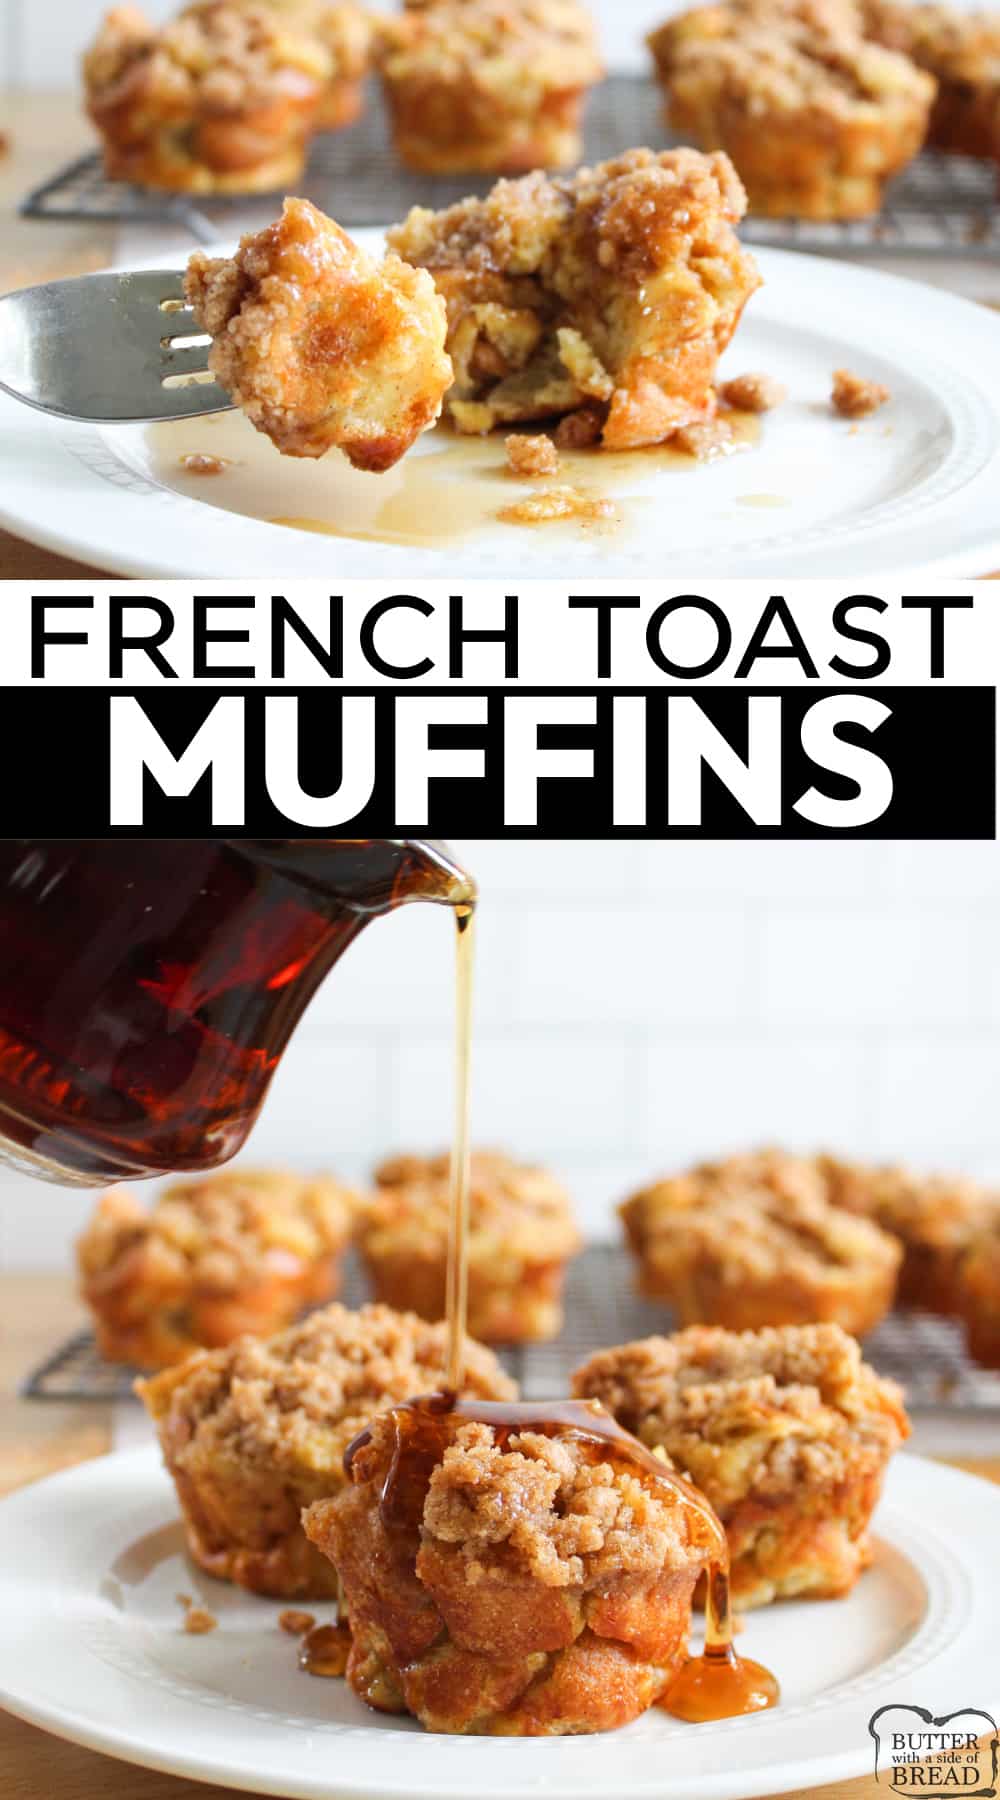 French Toast Muffins made with sourdough bread, milk and eggs and then topped with a simple cinnamon sugar streusel. Perfectly portioned servings of french toast baked in a muffin tin!